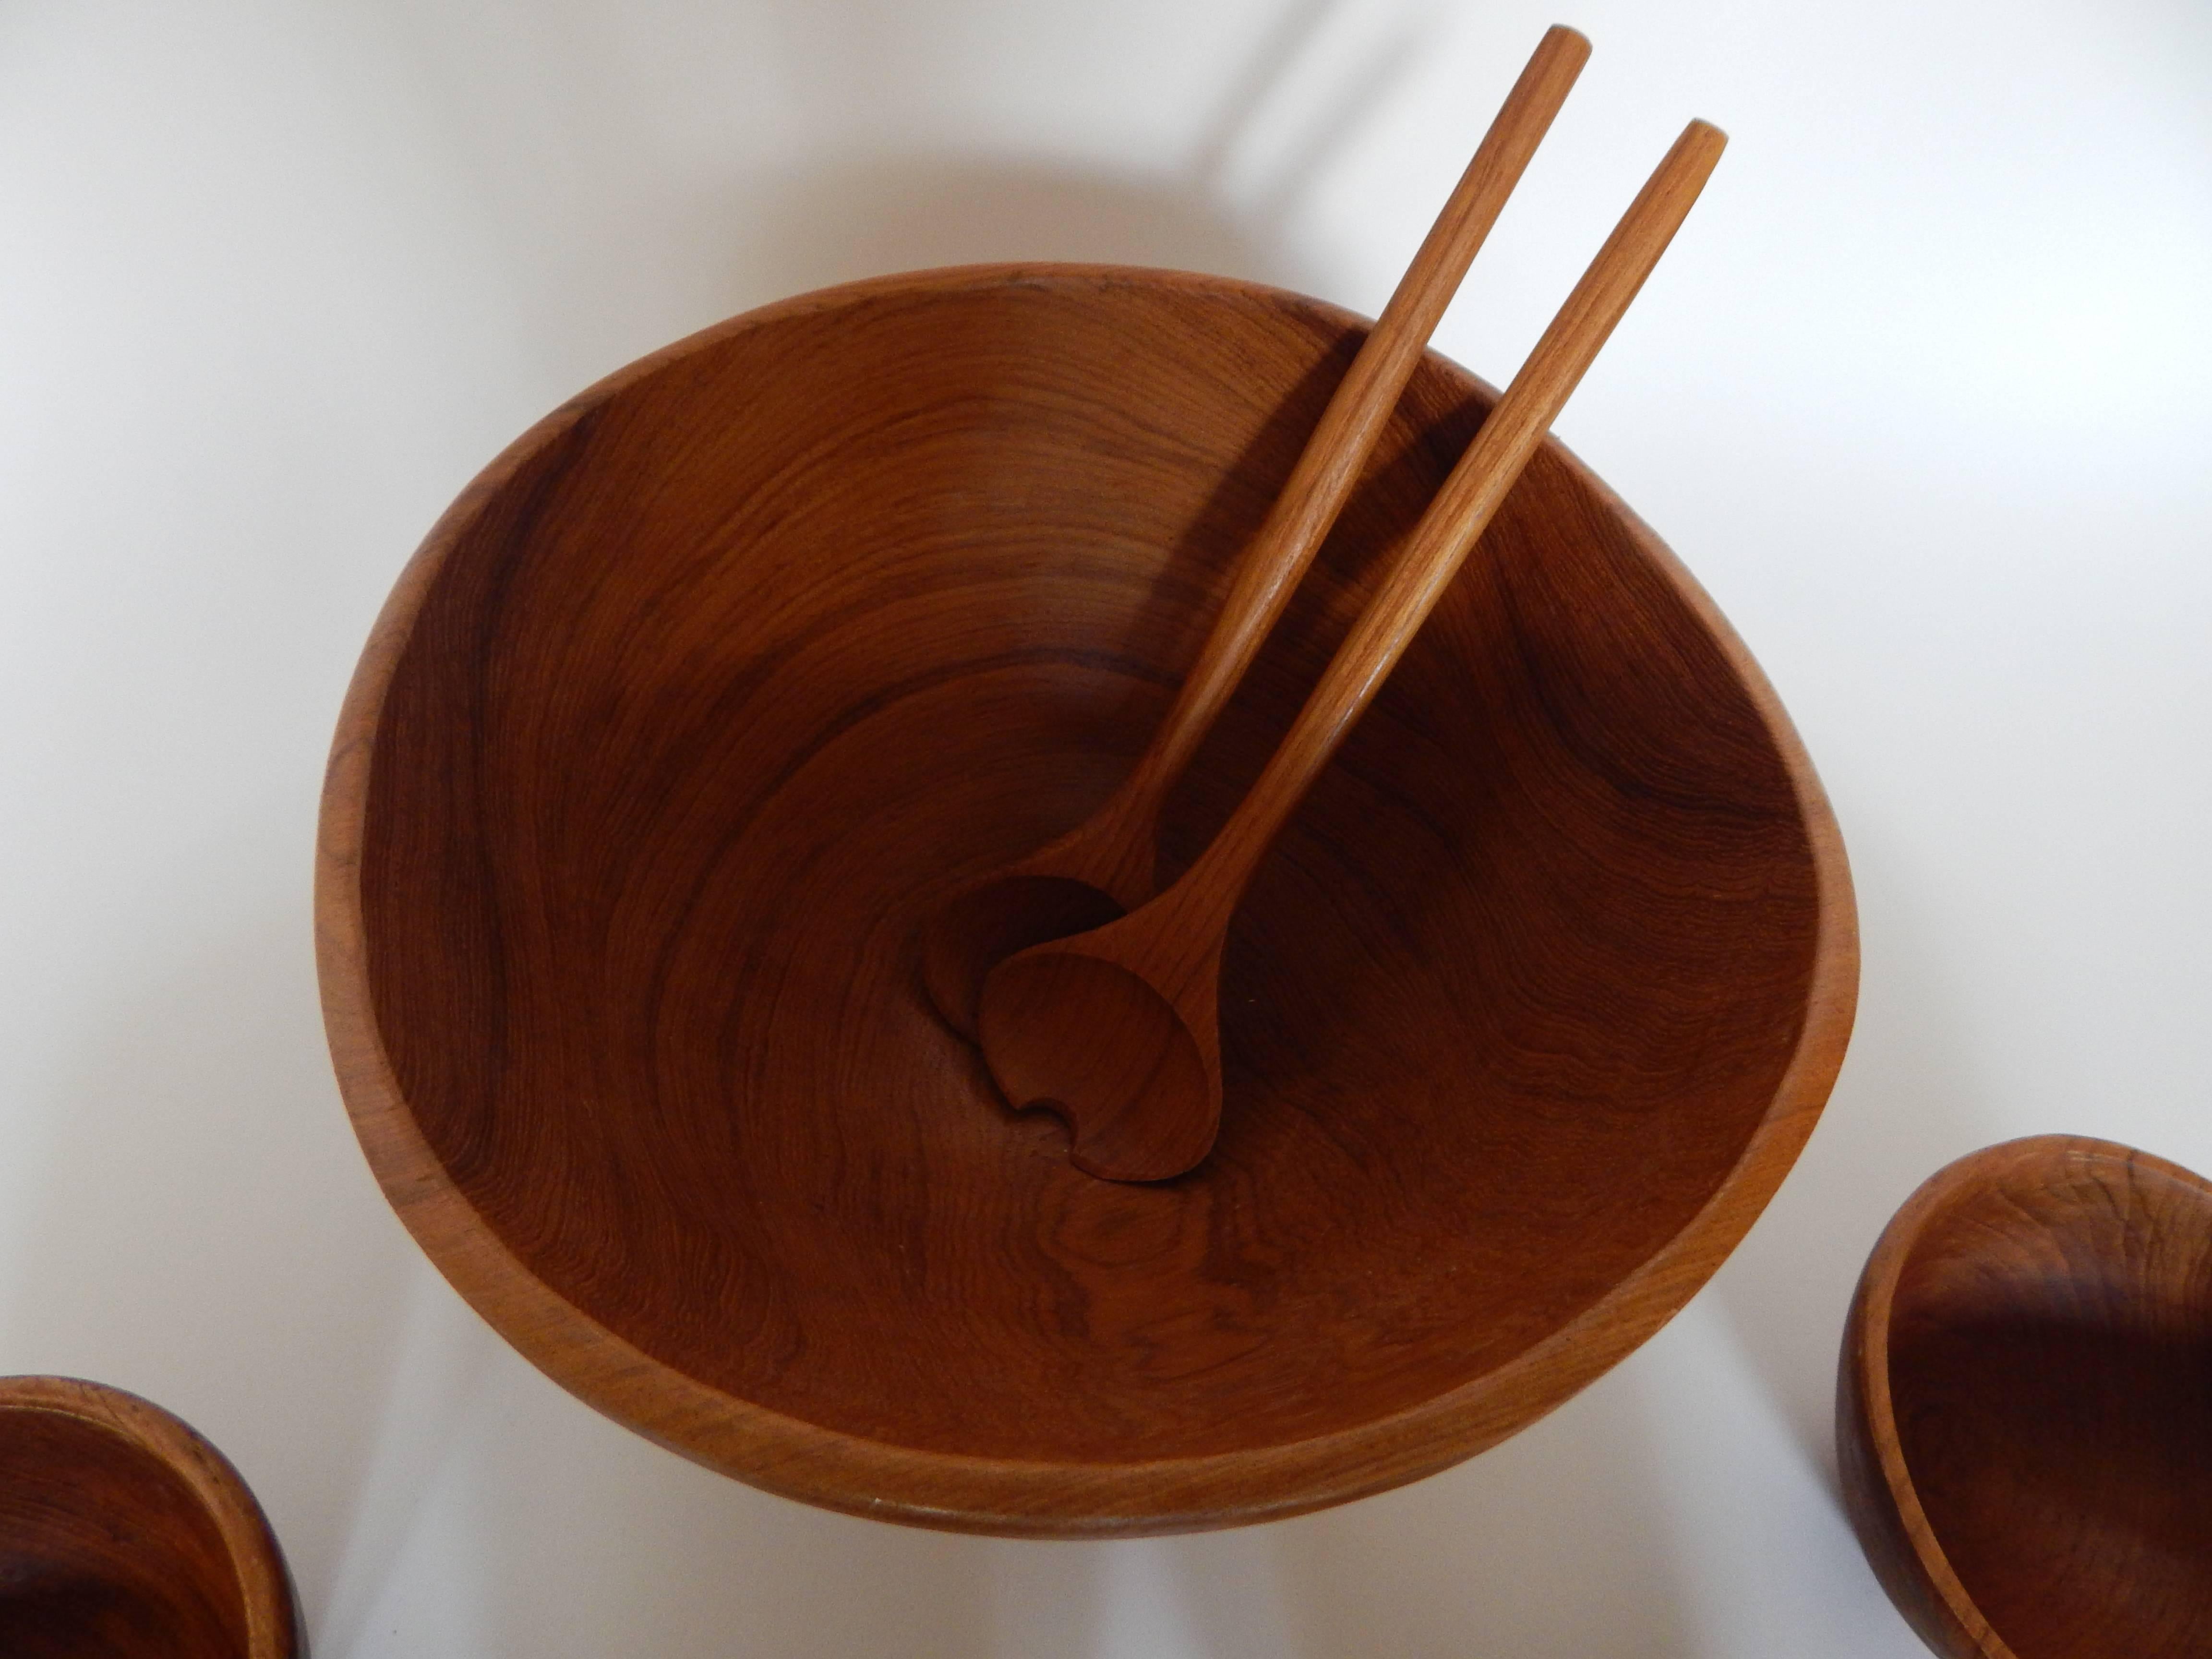 Mid-Century, 1960s hand-turned teak seven-piece salad set. Includes one large bowl, four small bowls and a set of teak salad tossing utinsels. 
All pieces in excellent condition.